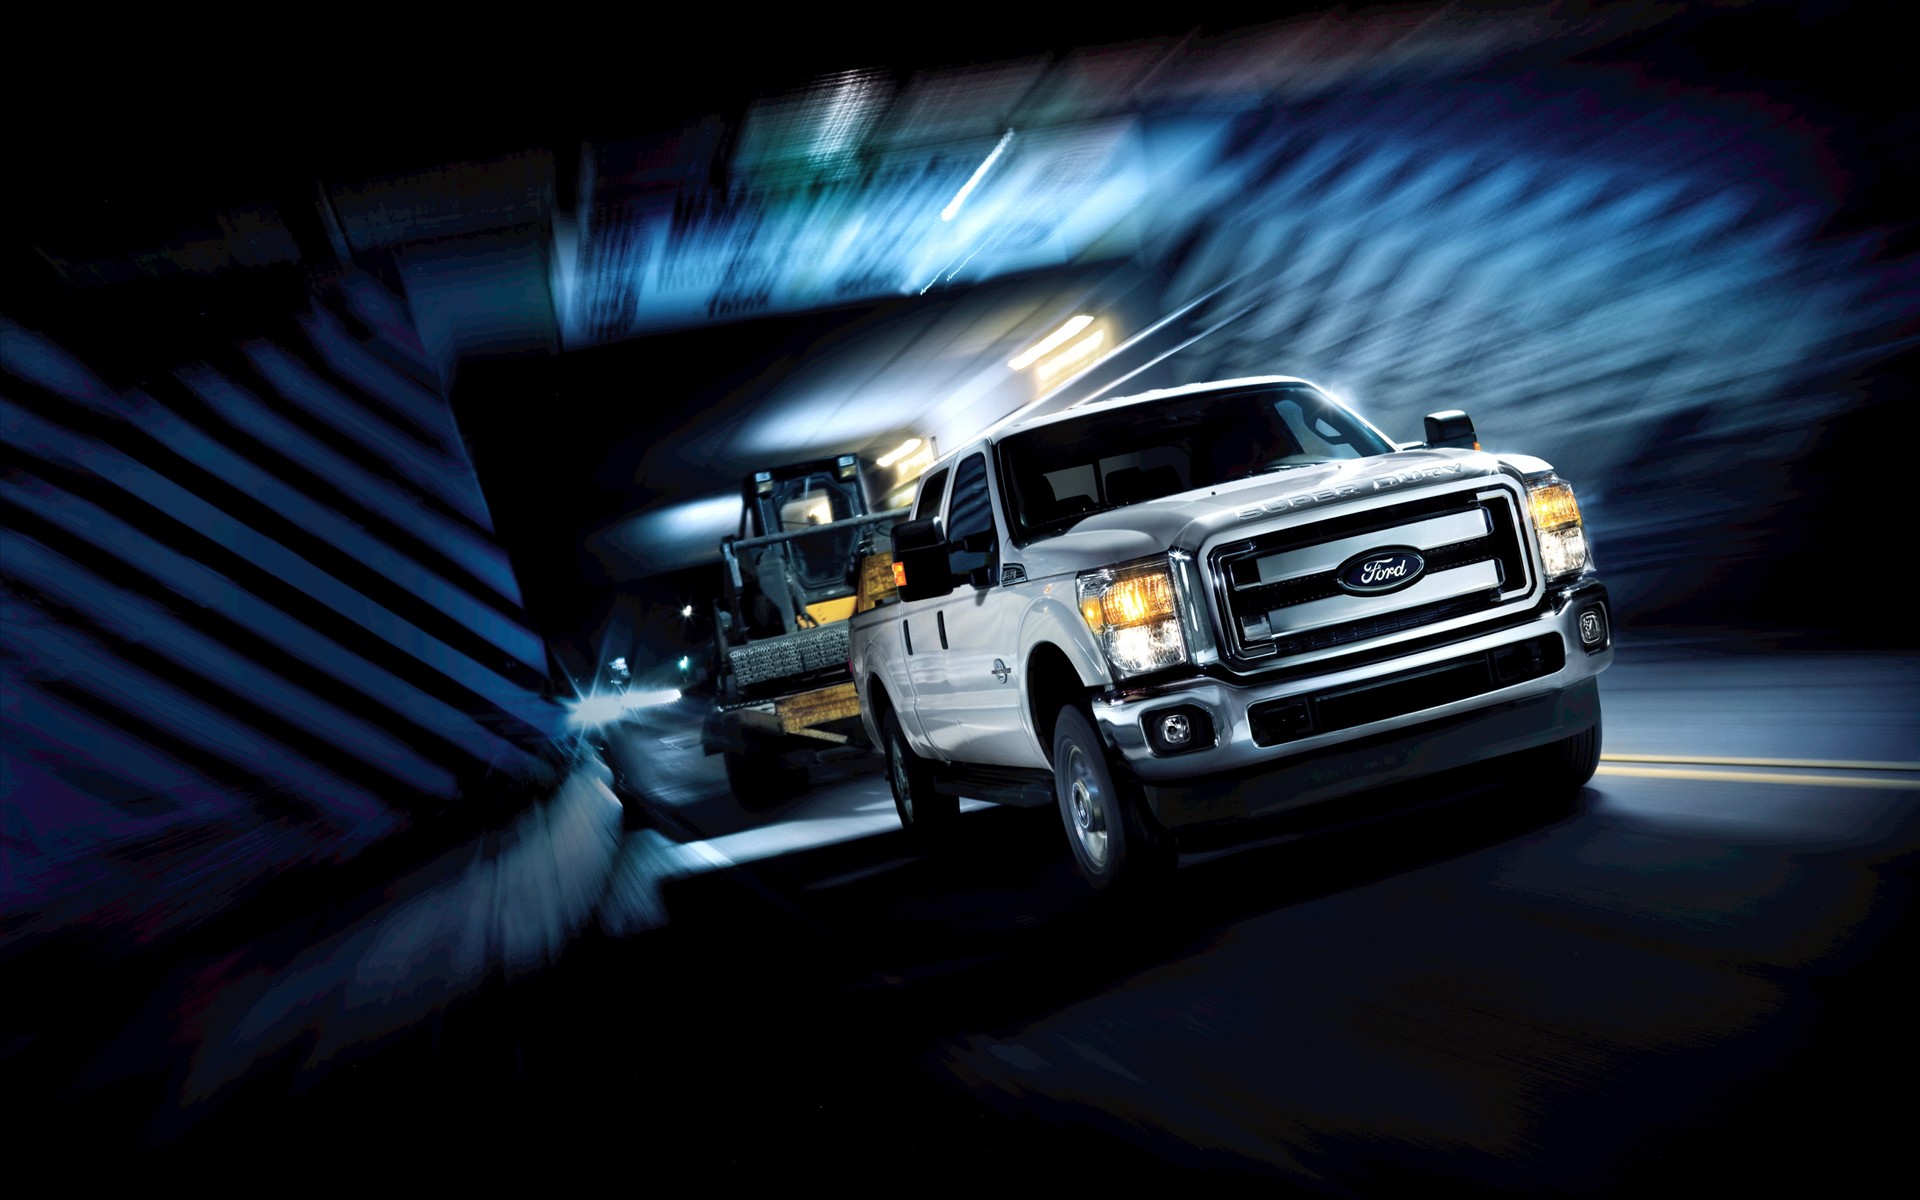 2011 Ford Super Duty Wallpapers HD Wallpapers 1920x1200